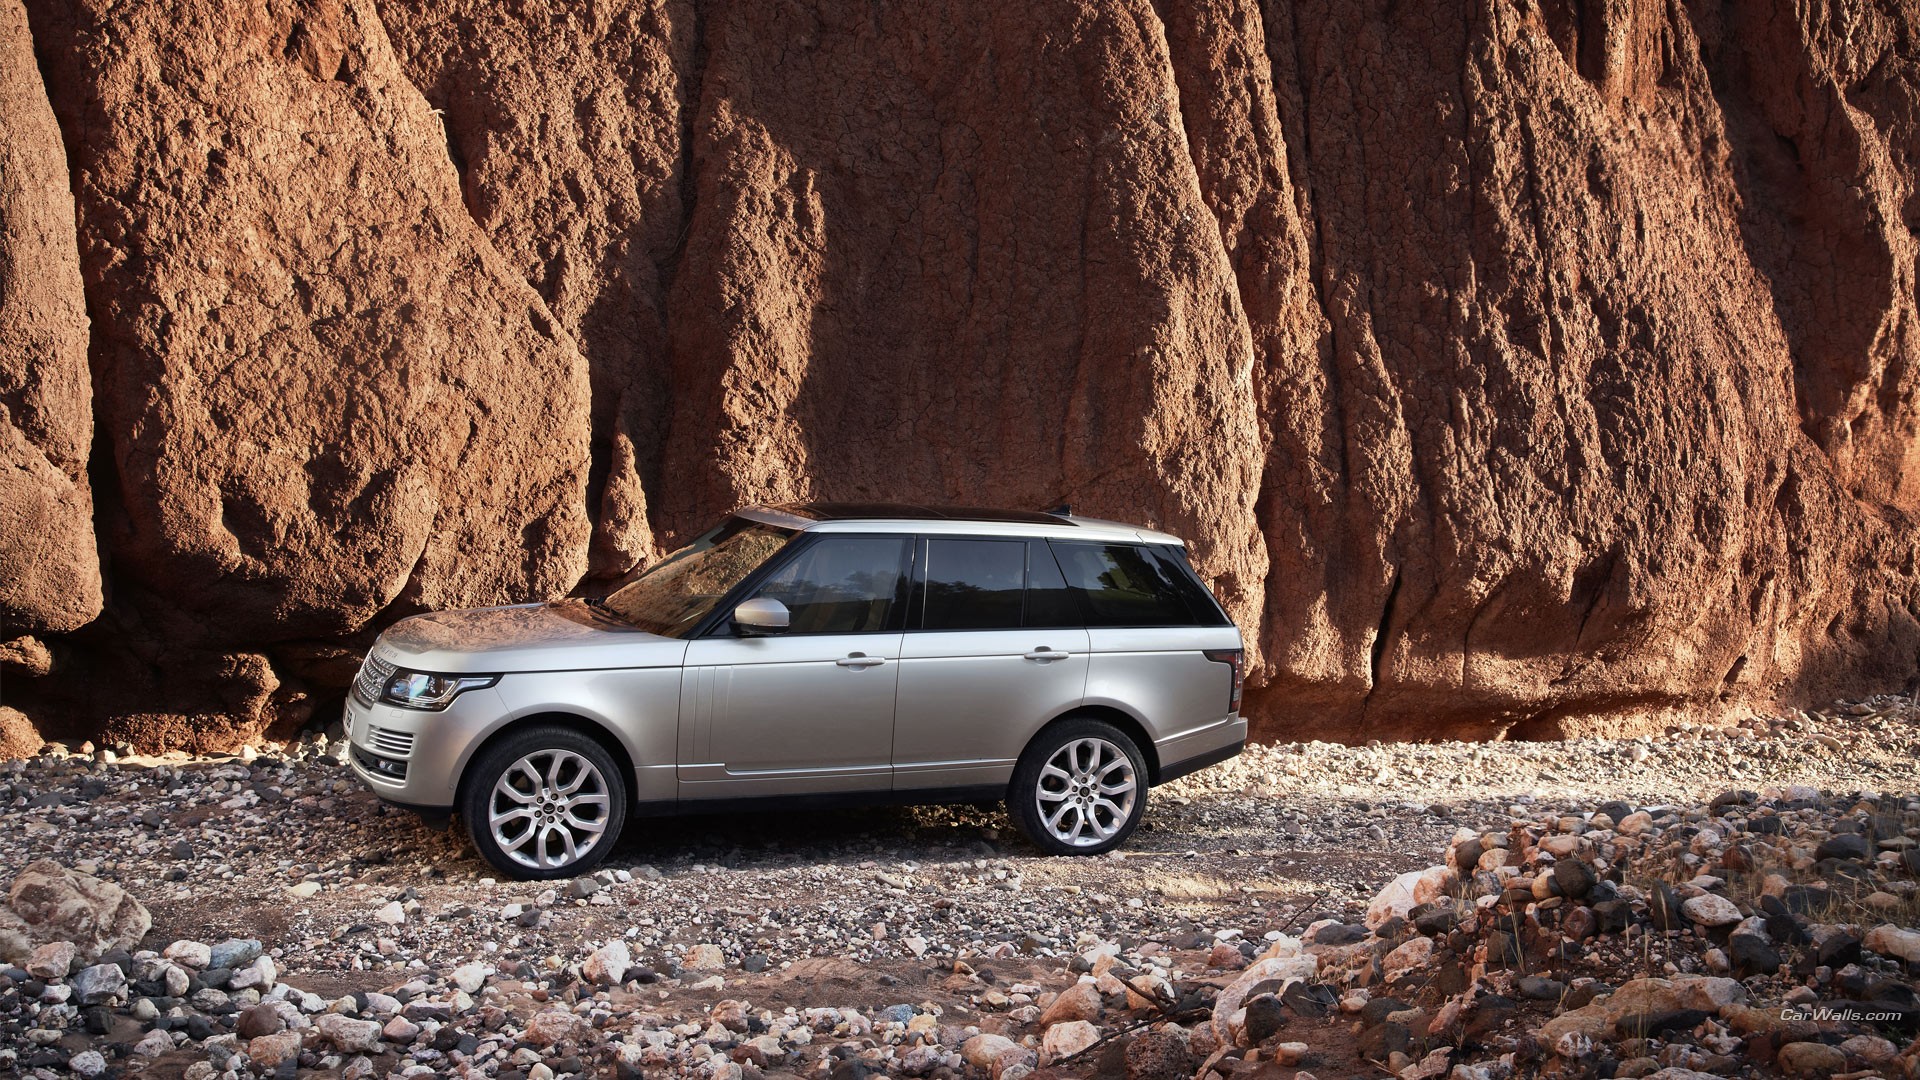 General 1920x1080 Range Rover car vehicle silver cars rocks outdoors Land Rover watermarked British cars SUV